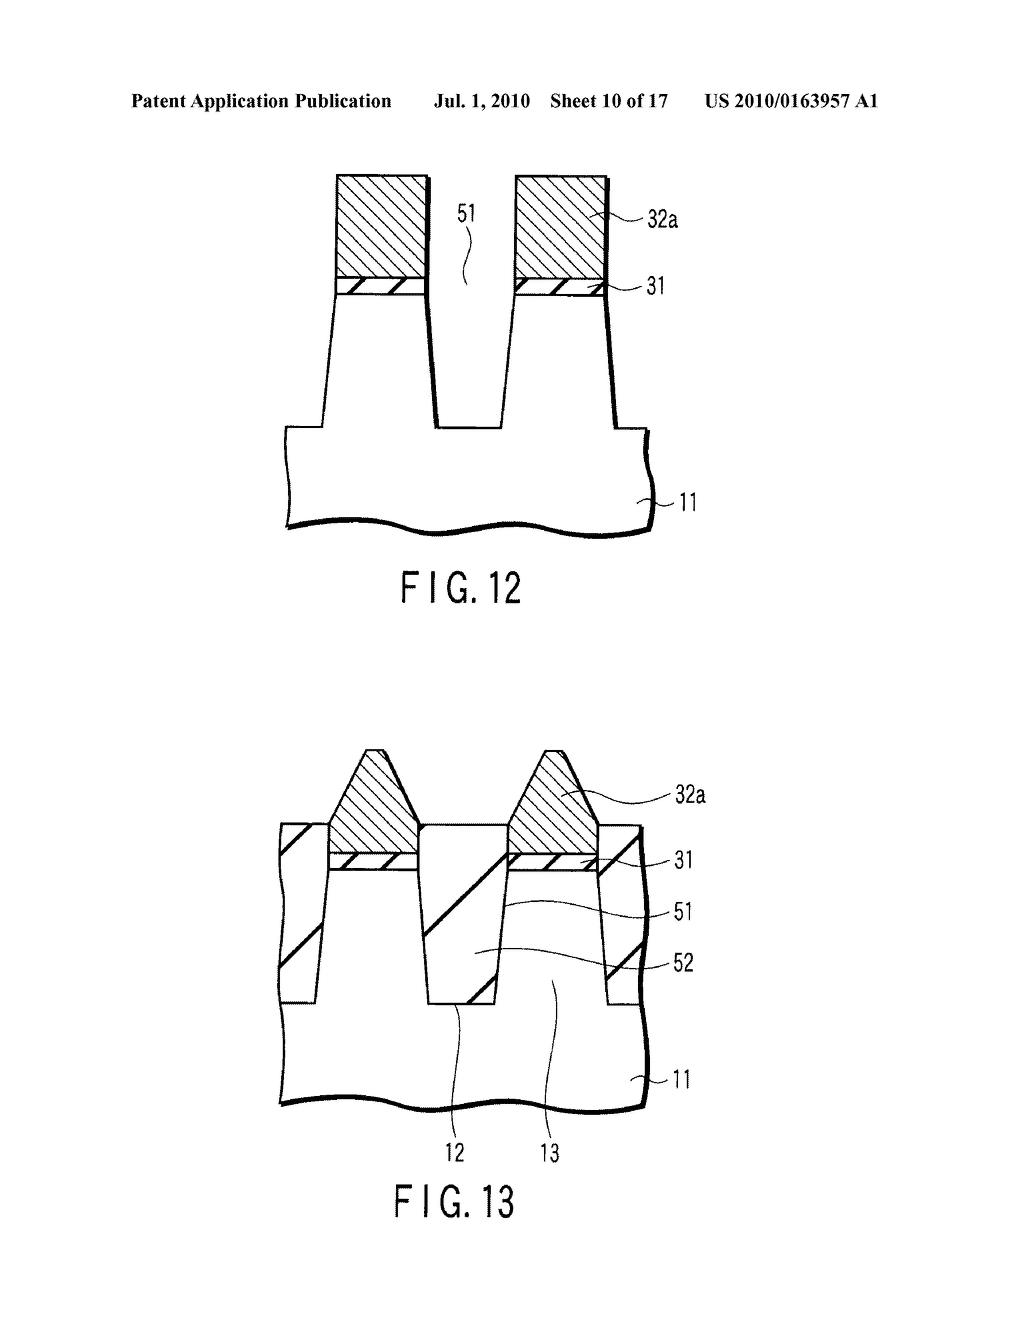 NONVOLATILE SEMICONDUCTOR MEMORY DEVICE INCLUDING MEMORY CELLS FORMED TO HAVE DOUBLE-LAYERED GATE ELECTRODES - diagram, schematic, and image 11